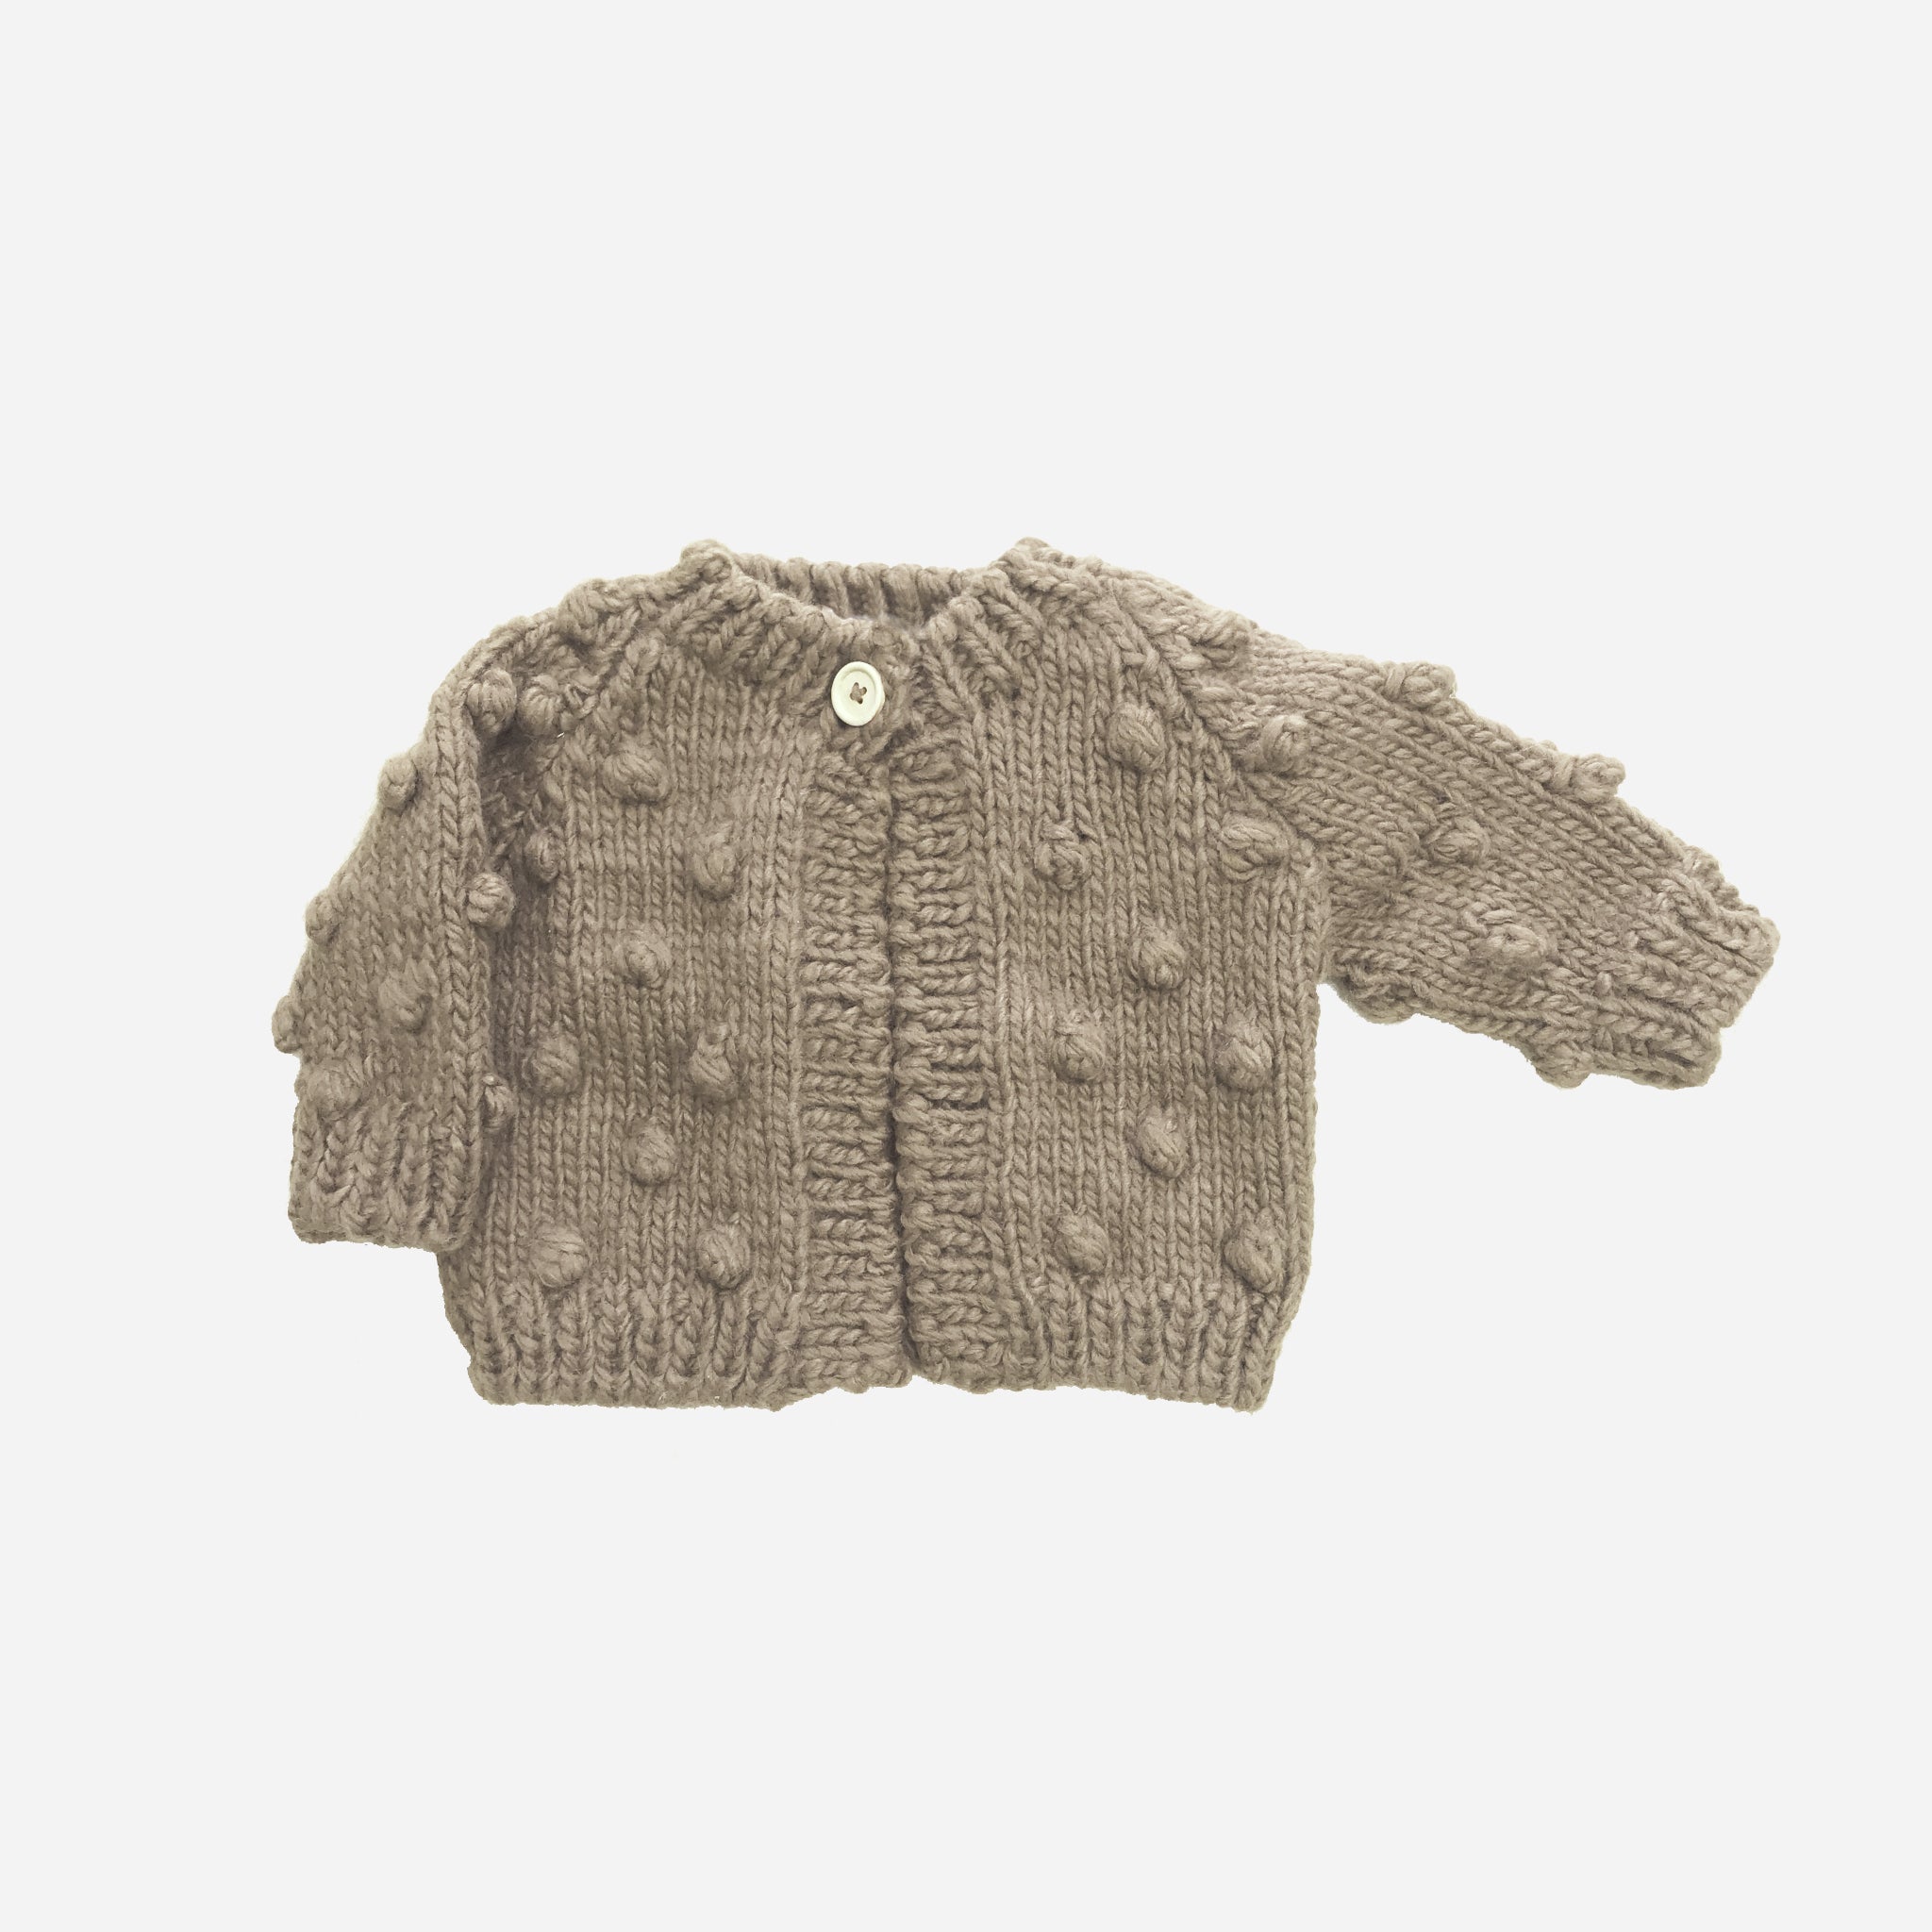 Timeless Handmade Baby Cardigan: Celebrate with this Precious Gift